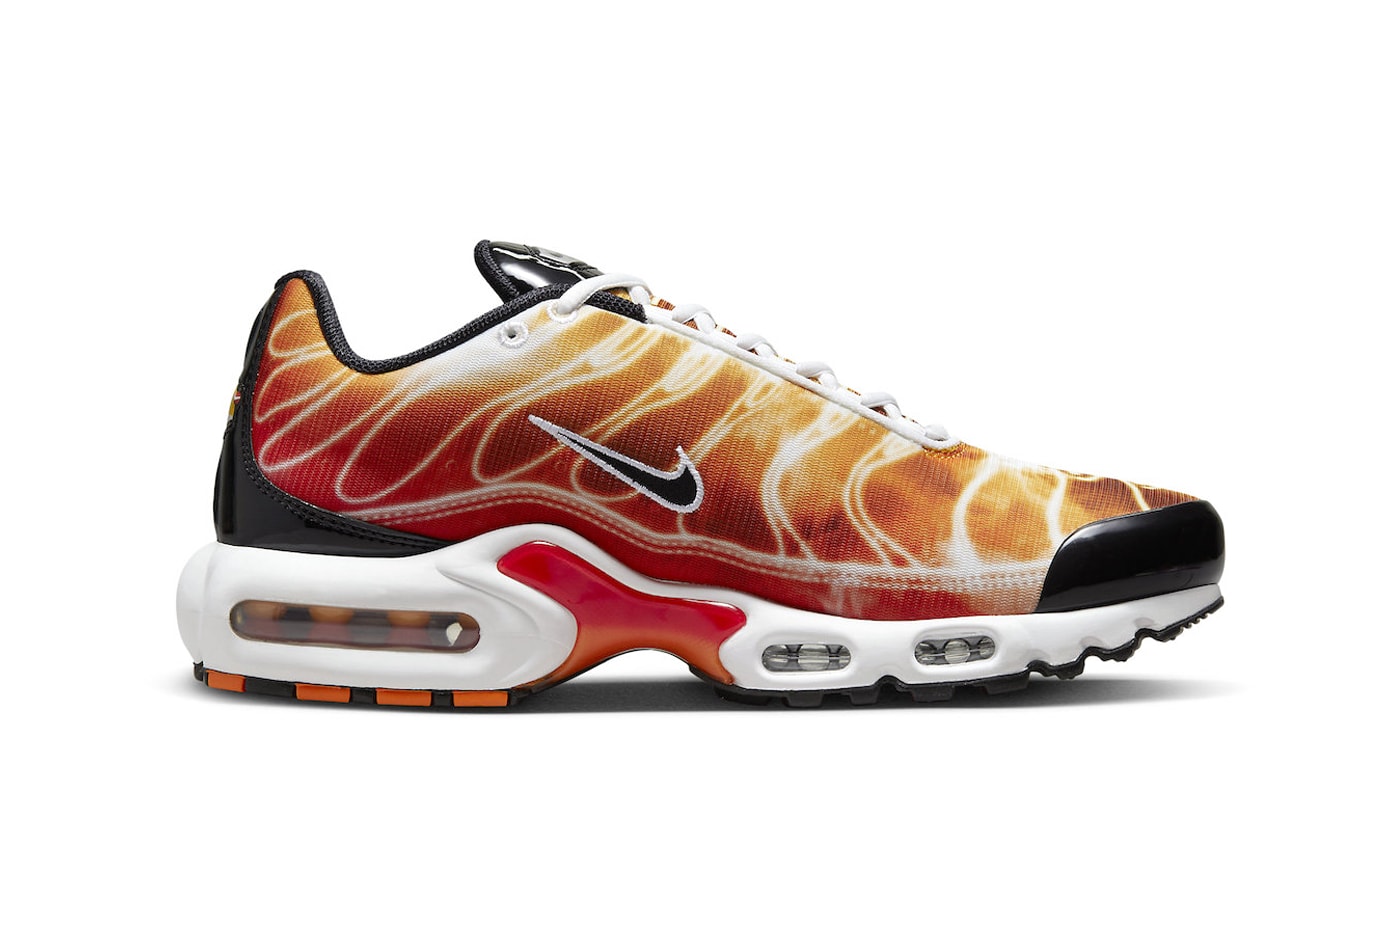 Nike Air Max Plus Light Photography Receives a Fiery Makeover